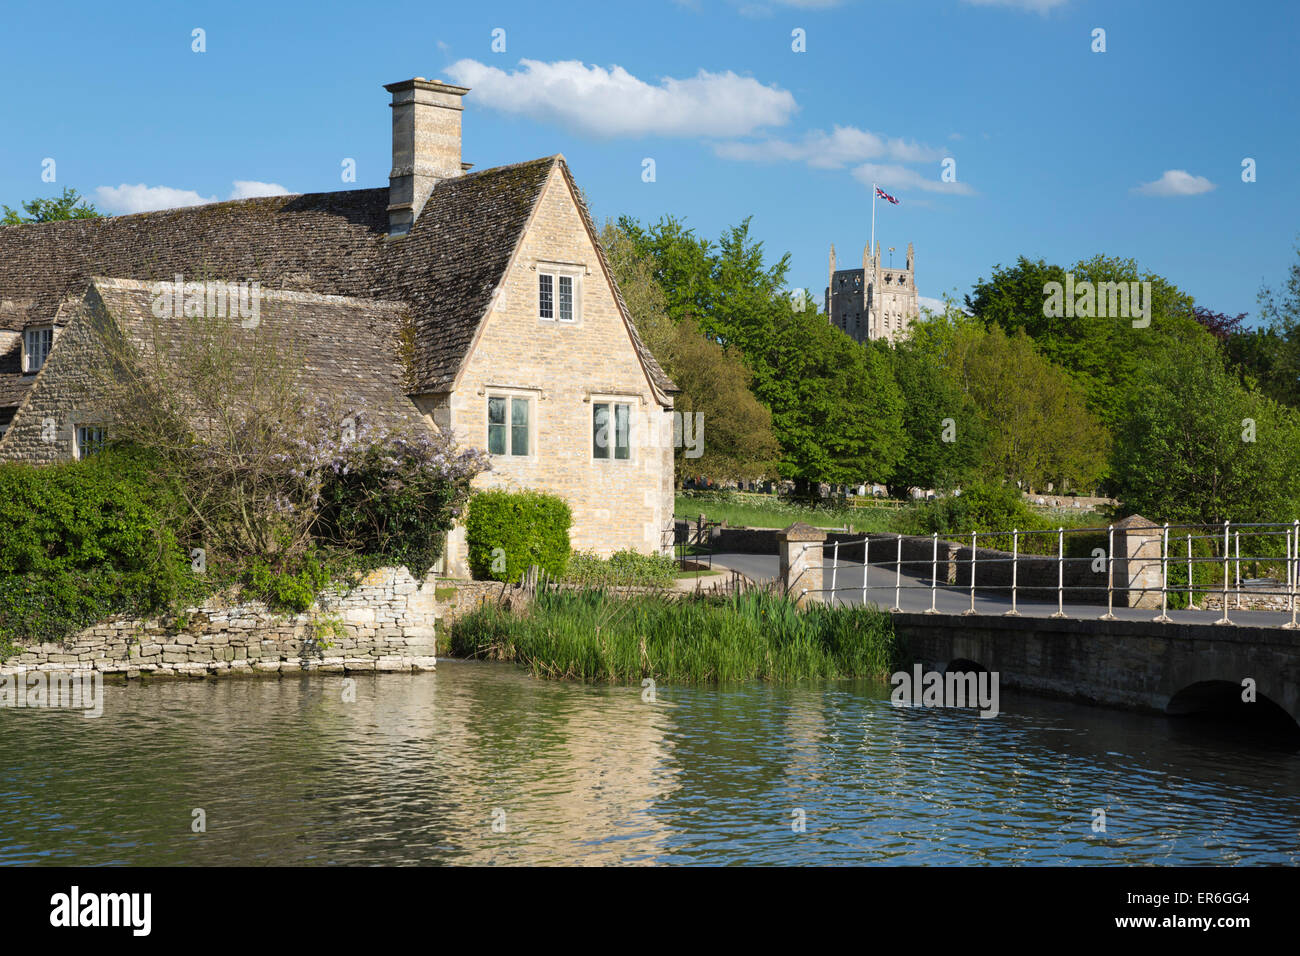 River Coln and Fairford church, Fairford, Cotswolds, Gloucestershire, England, United Kingdom, Europe Stock Photo